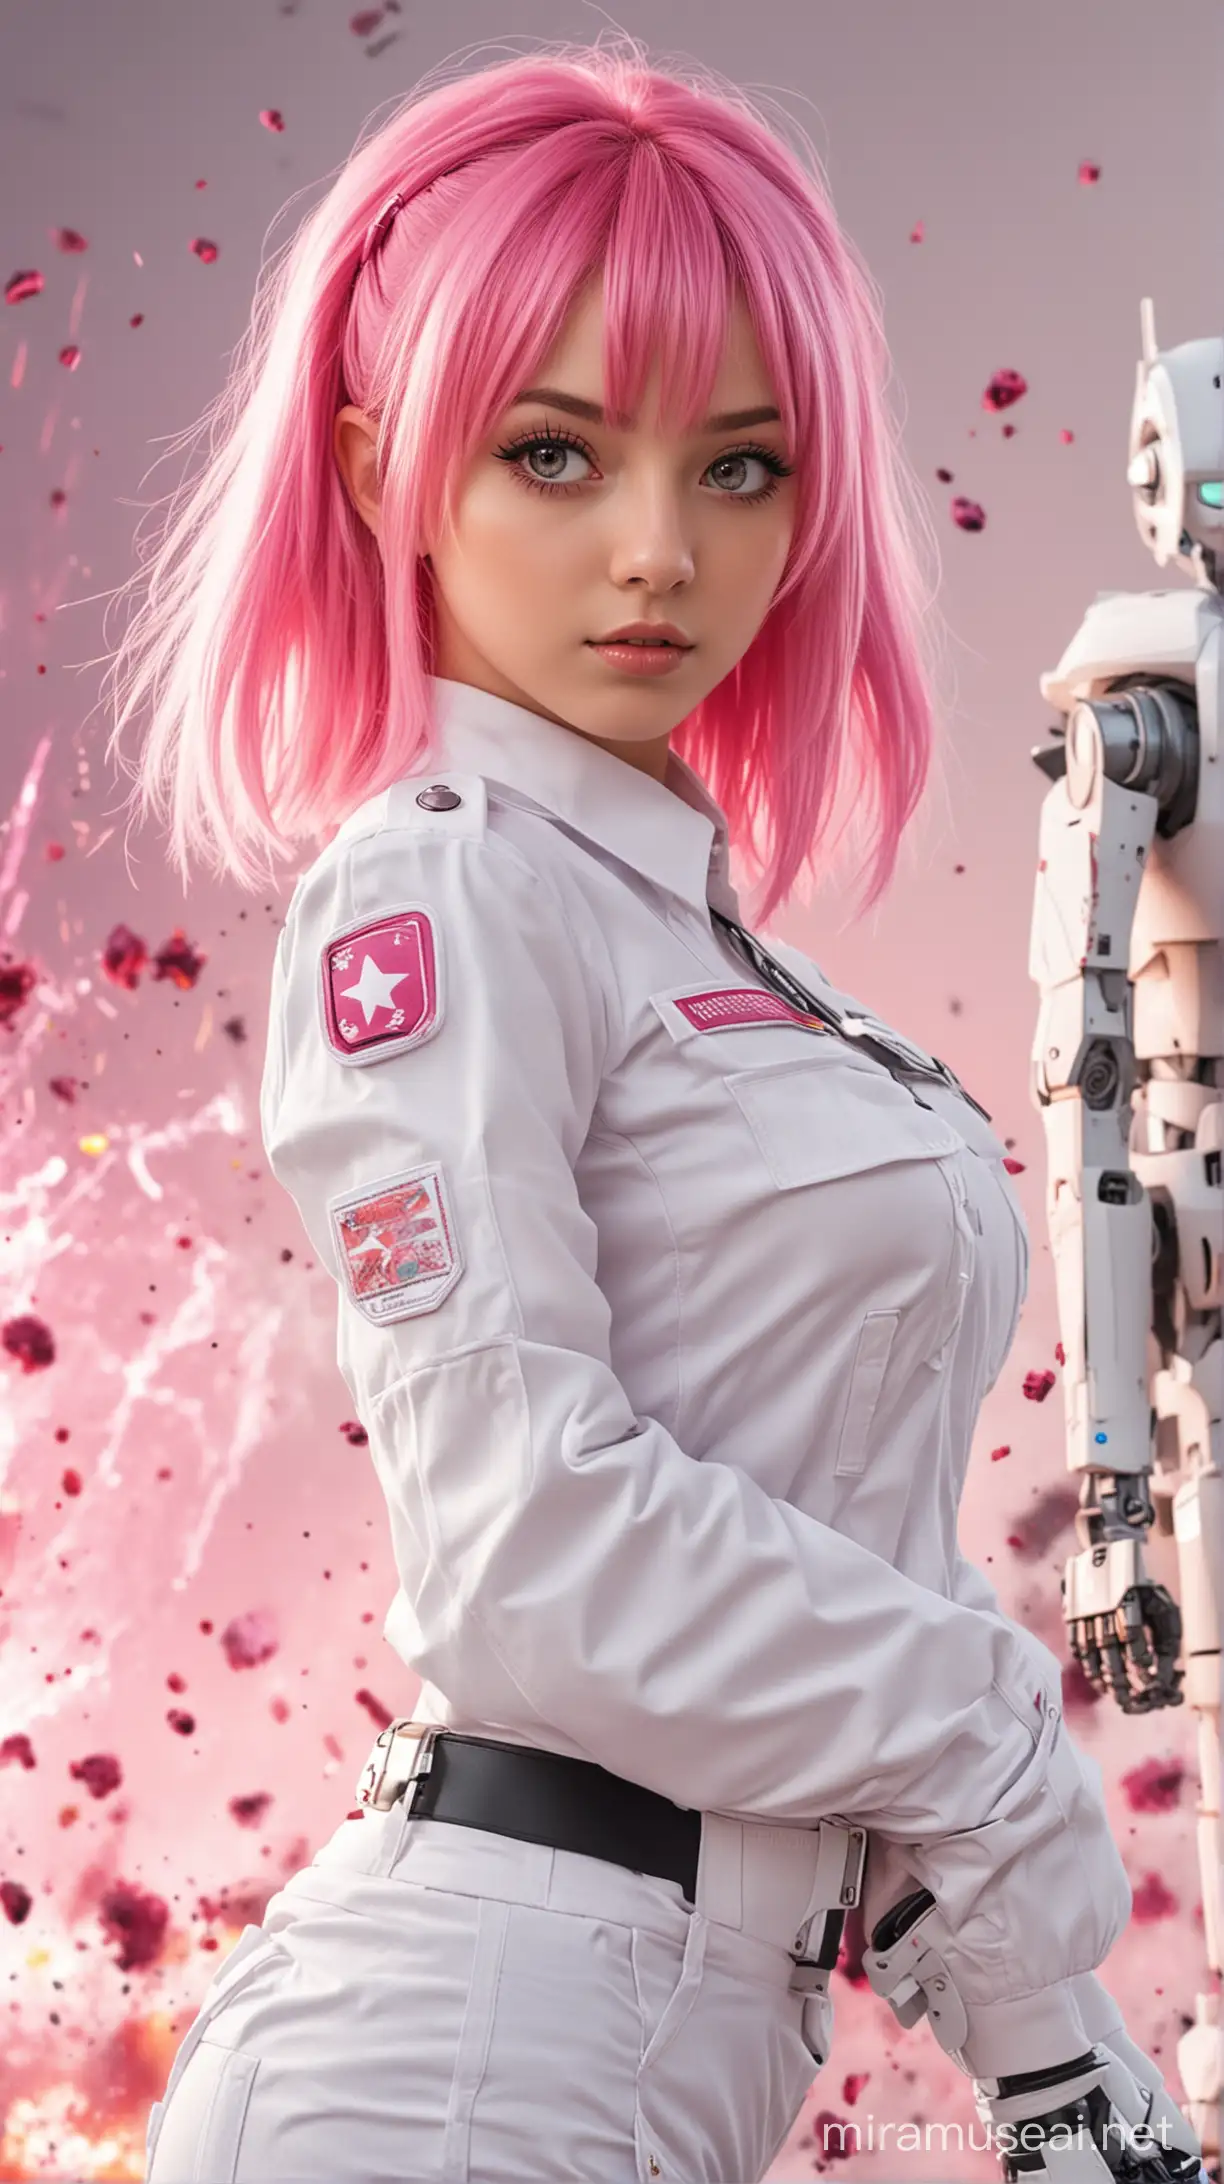 Futuristic Security Guard Young Anime Girl with Pastel Pink Hair and Fuchsia Eyes Amidst Robot Explosions